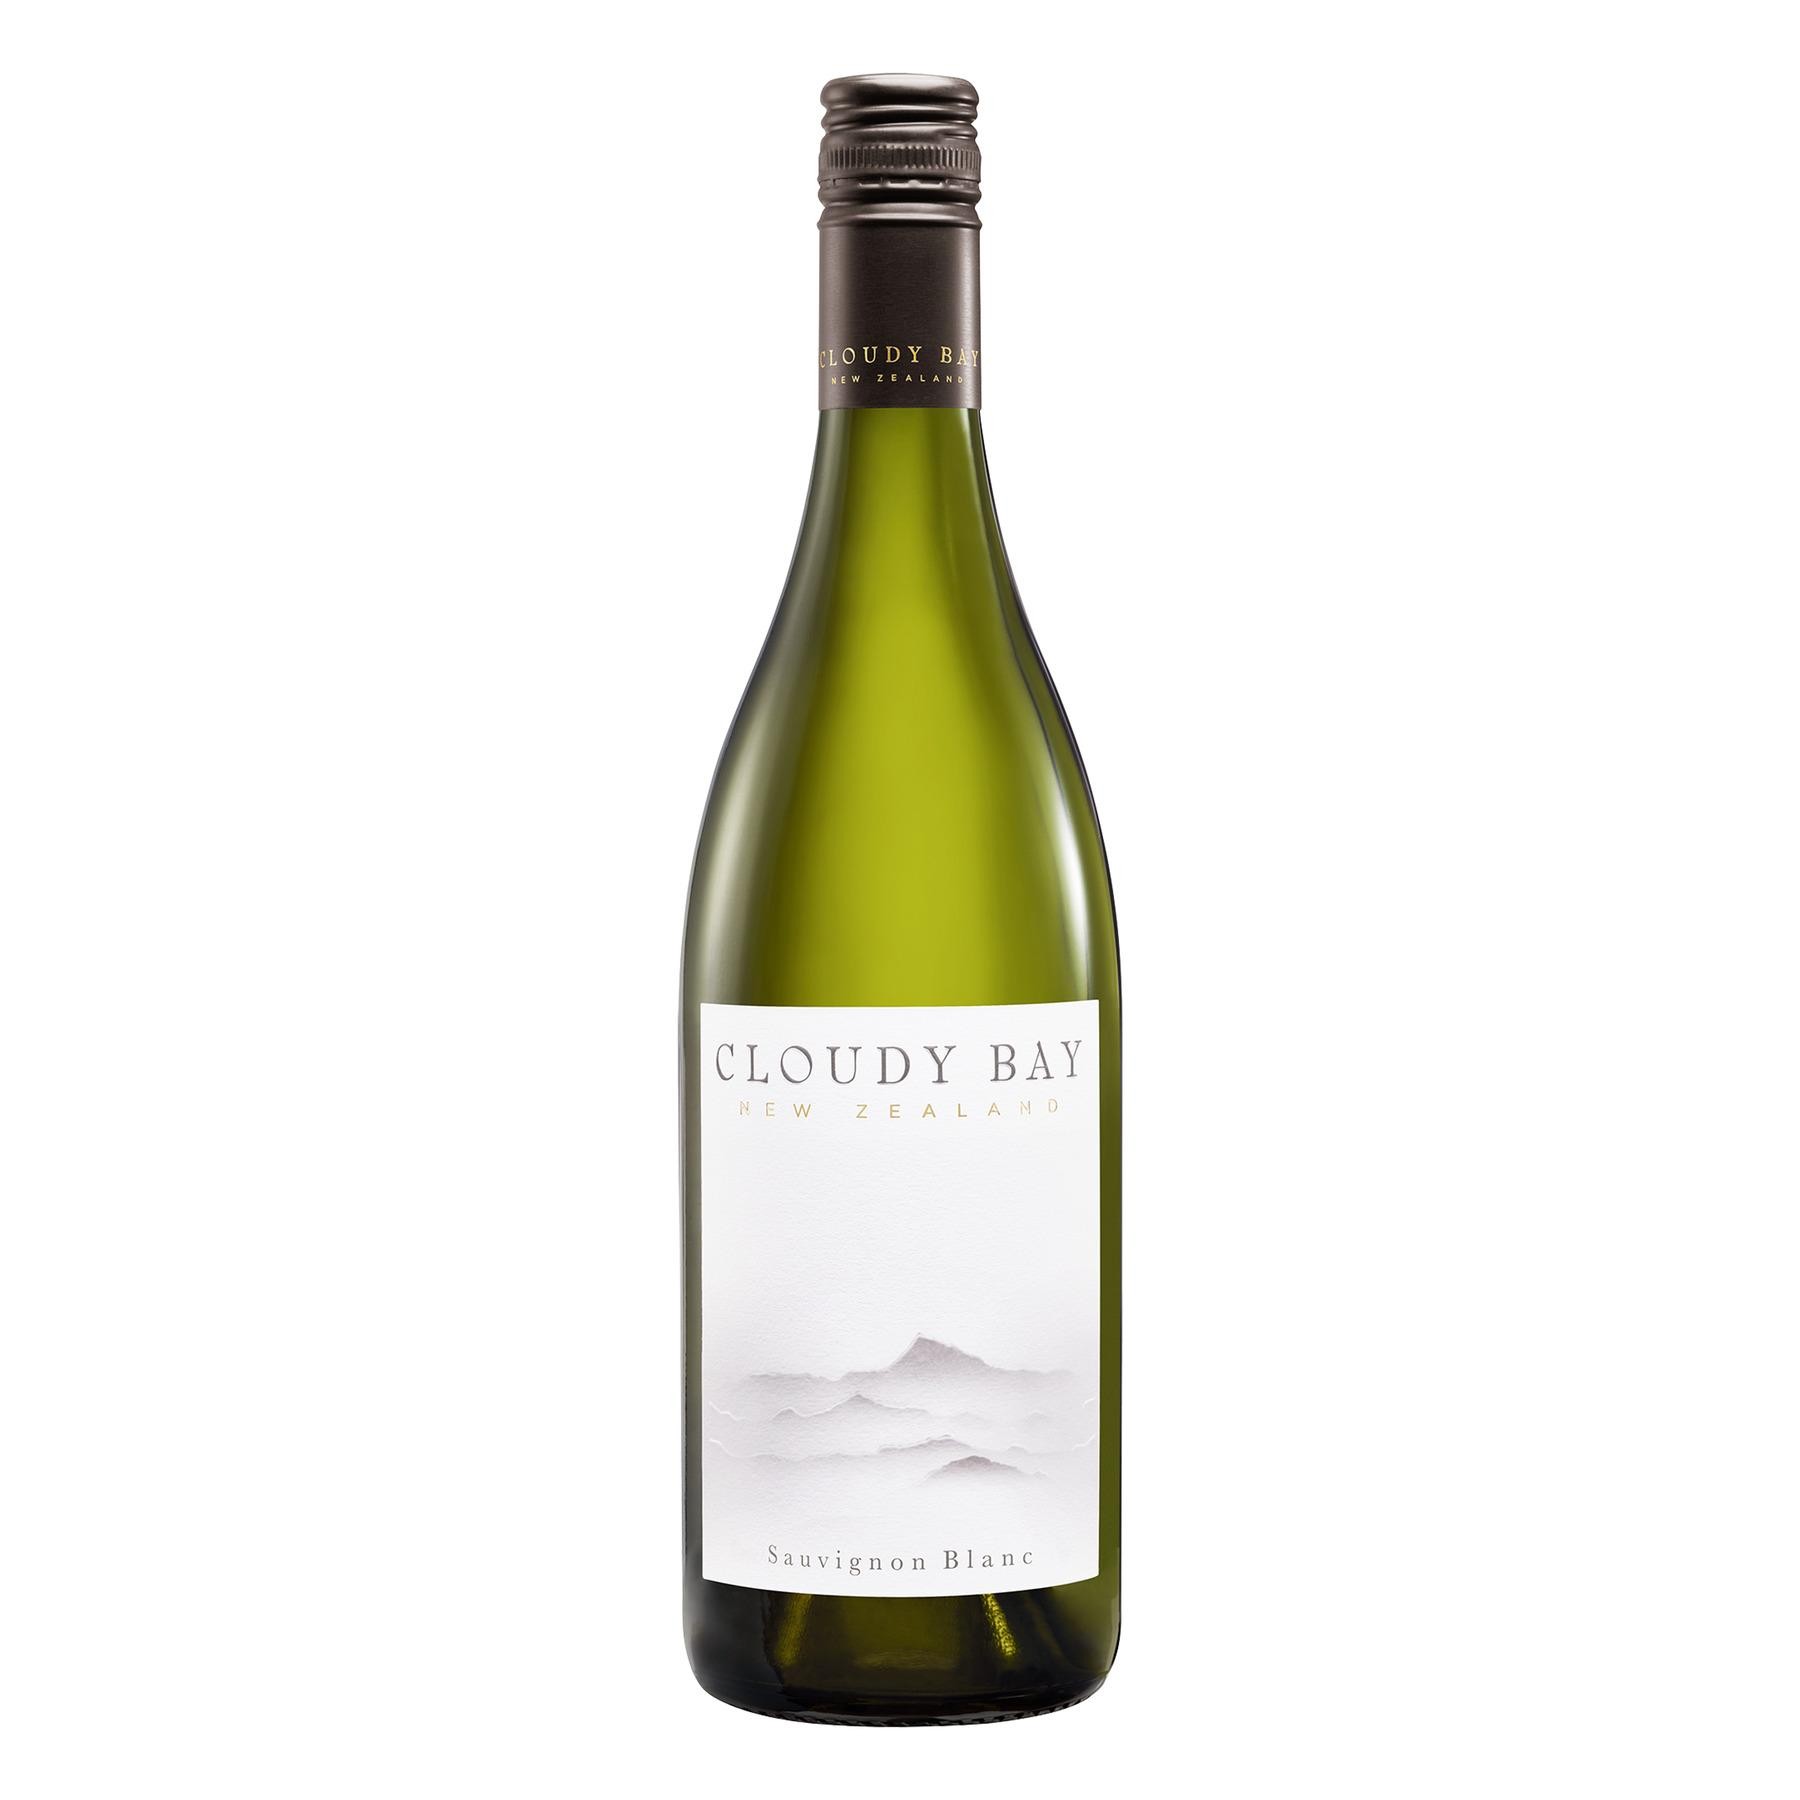 Cloudy Bay Sauvignon Blanc - White Wine from New Zealand - 750ml Bottle